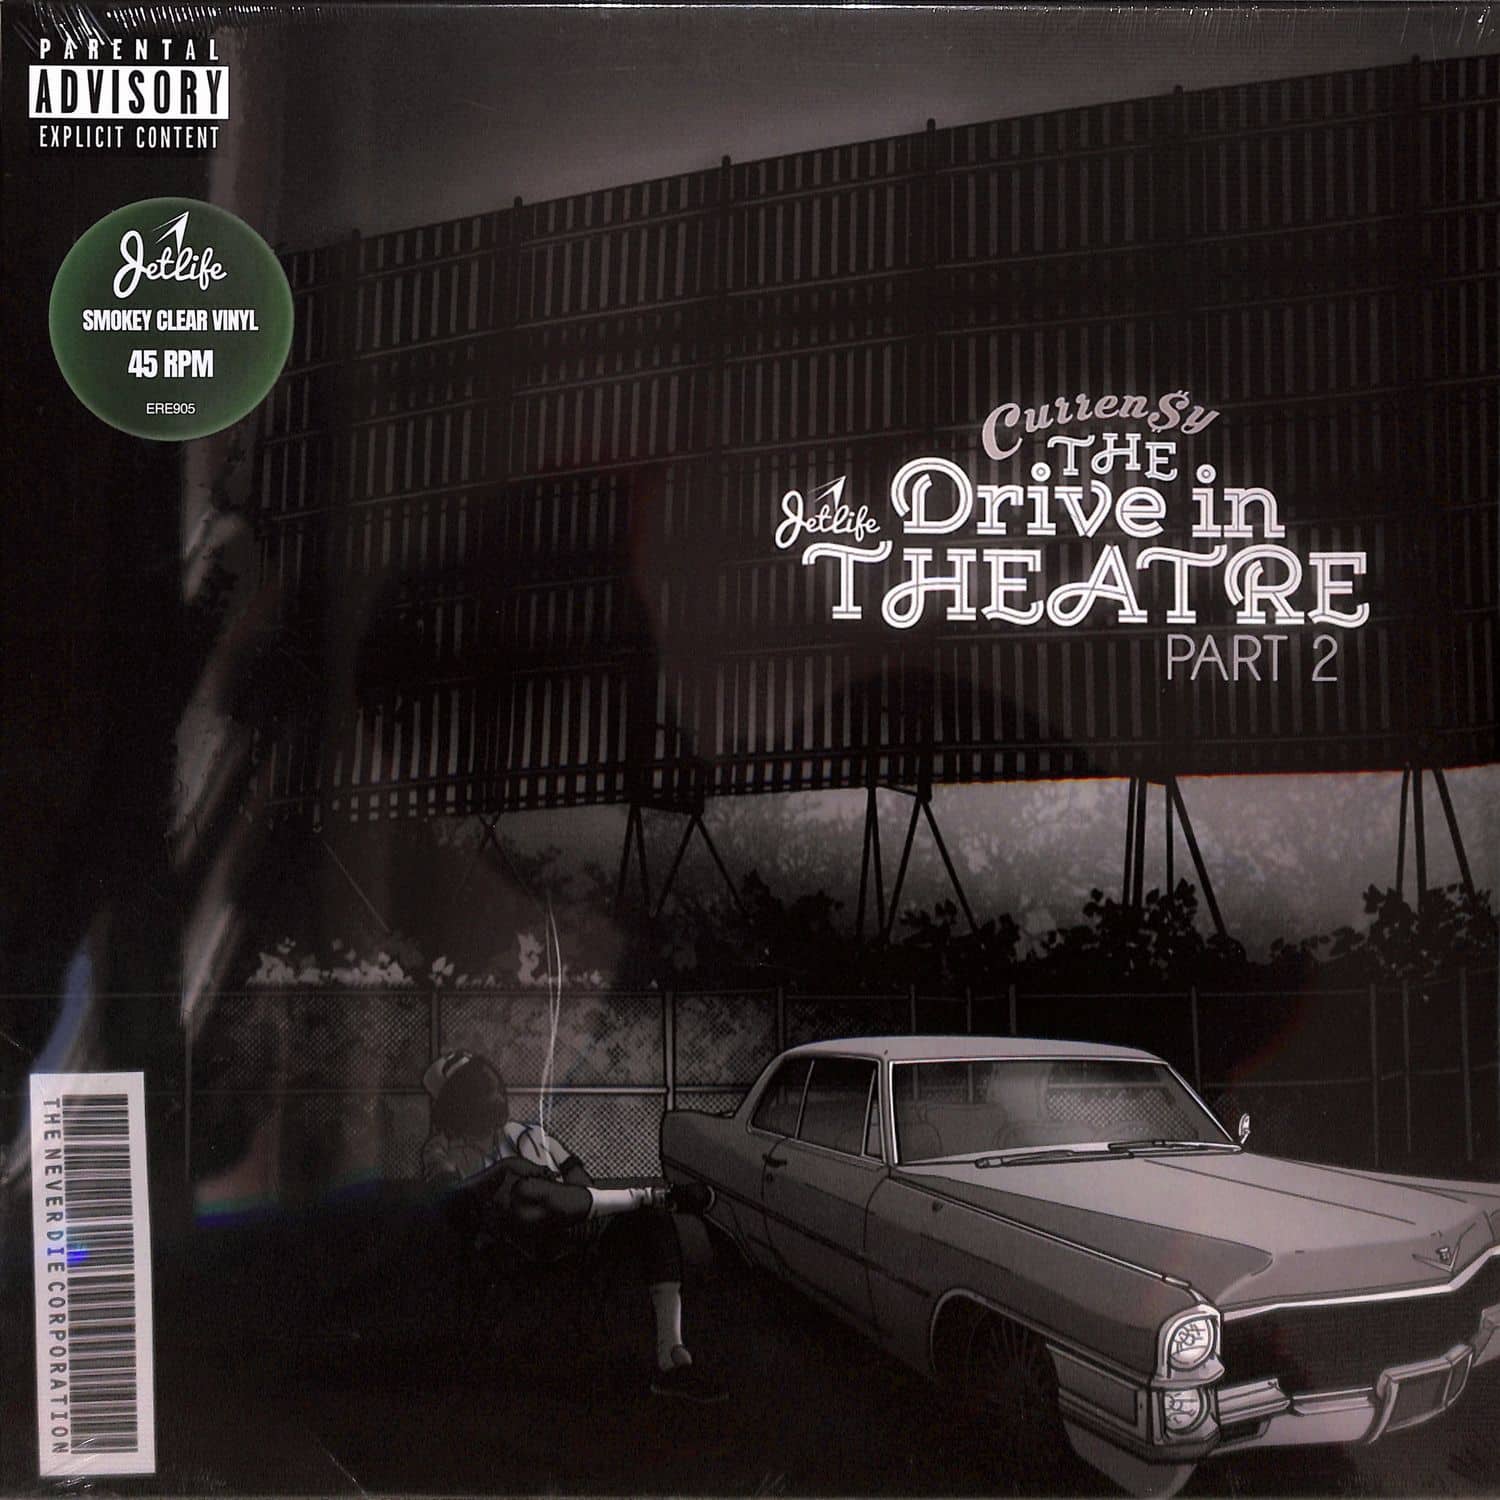 Currensy - THE DRIVE IN THEATRE PART 2 